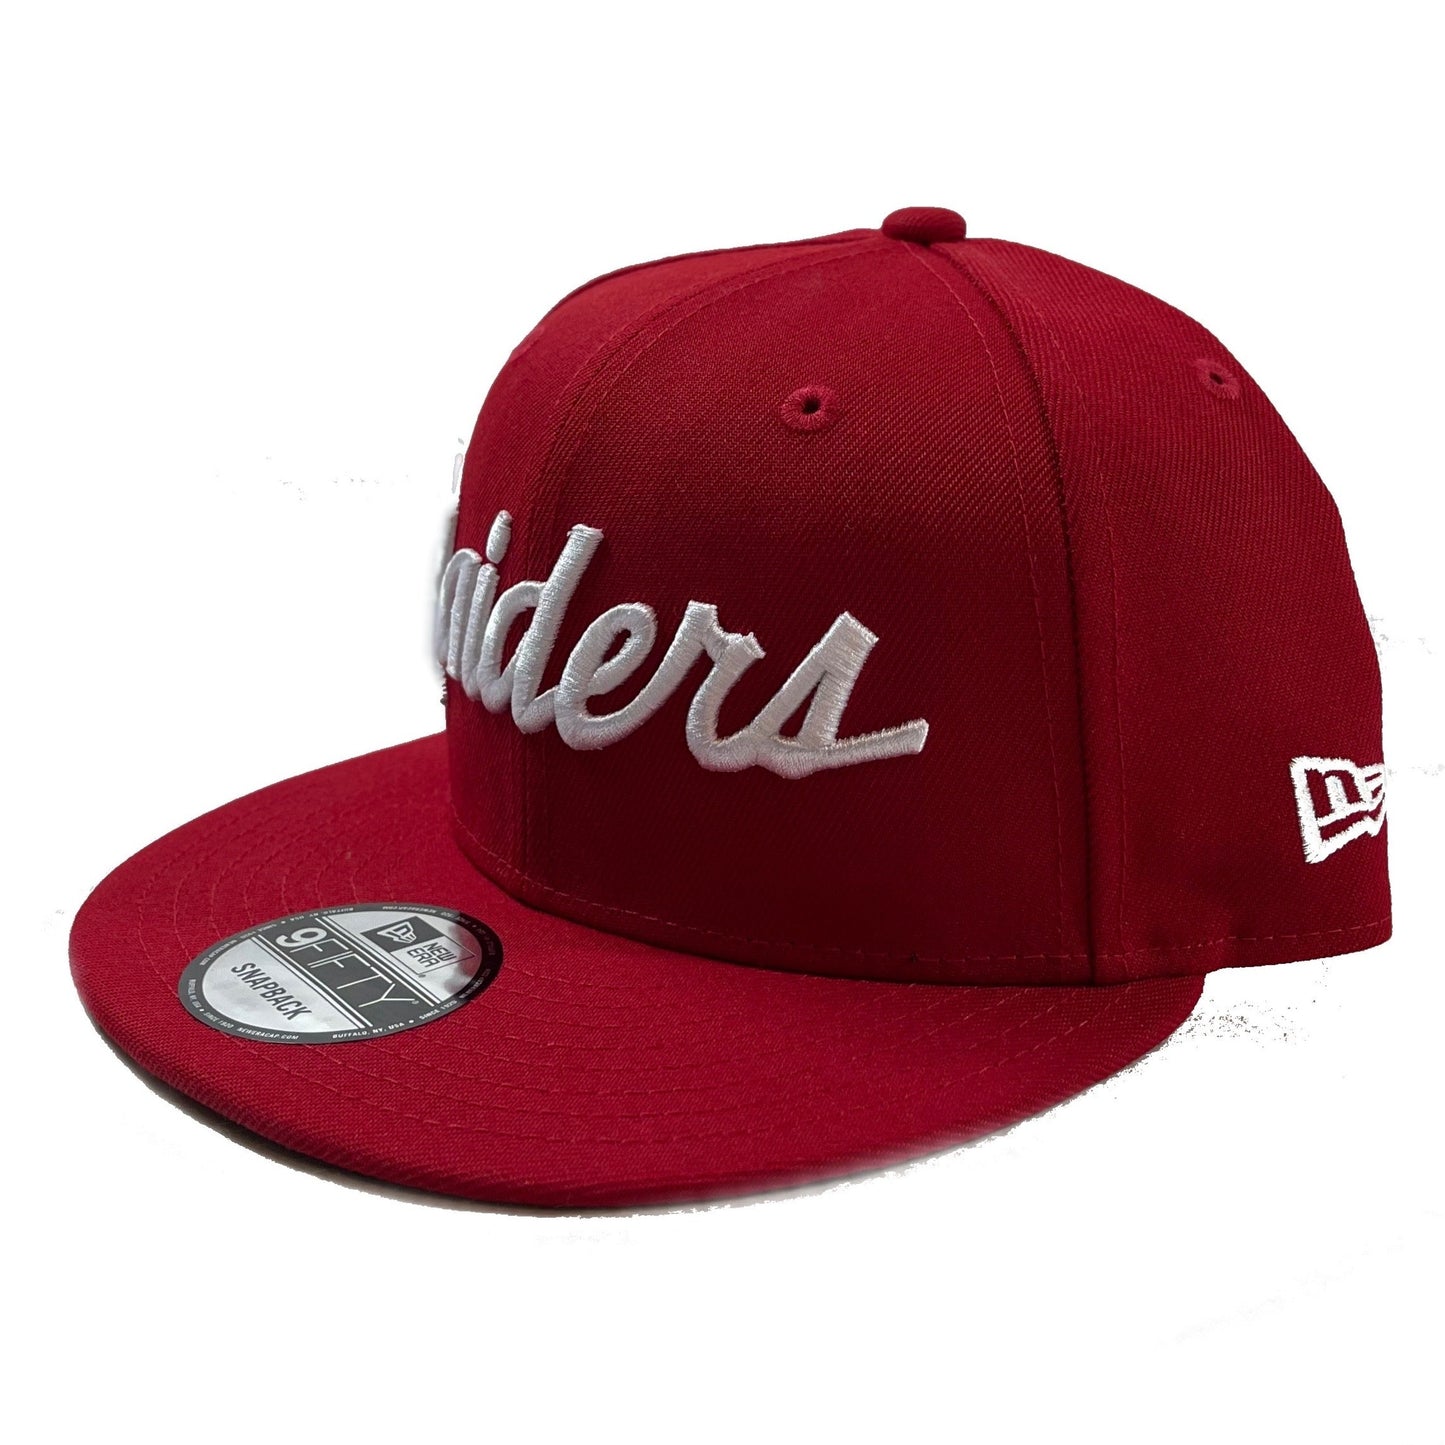 Raiders Worded (Red) Snapbacks/Fitted